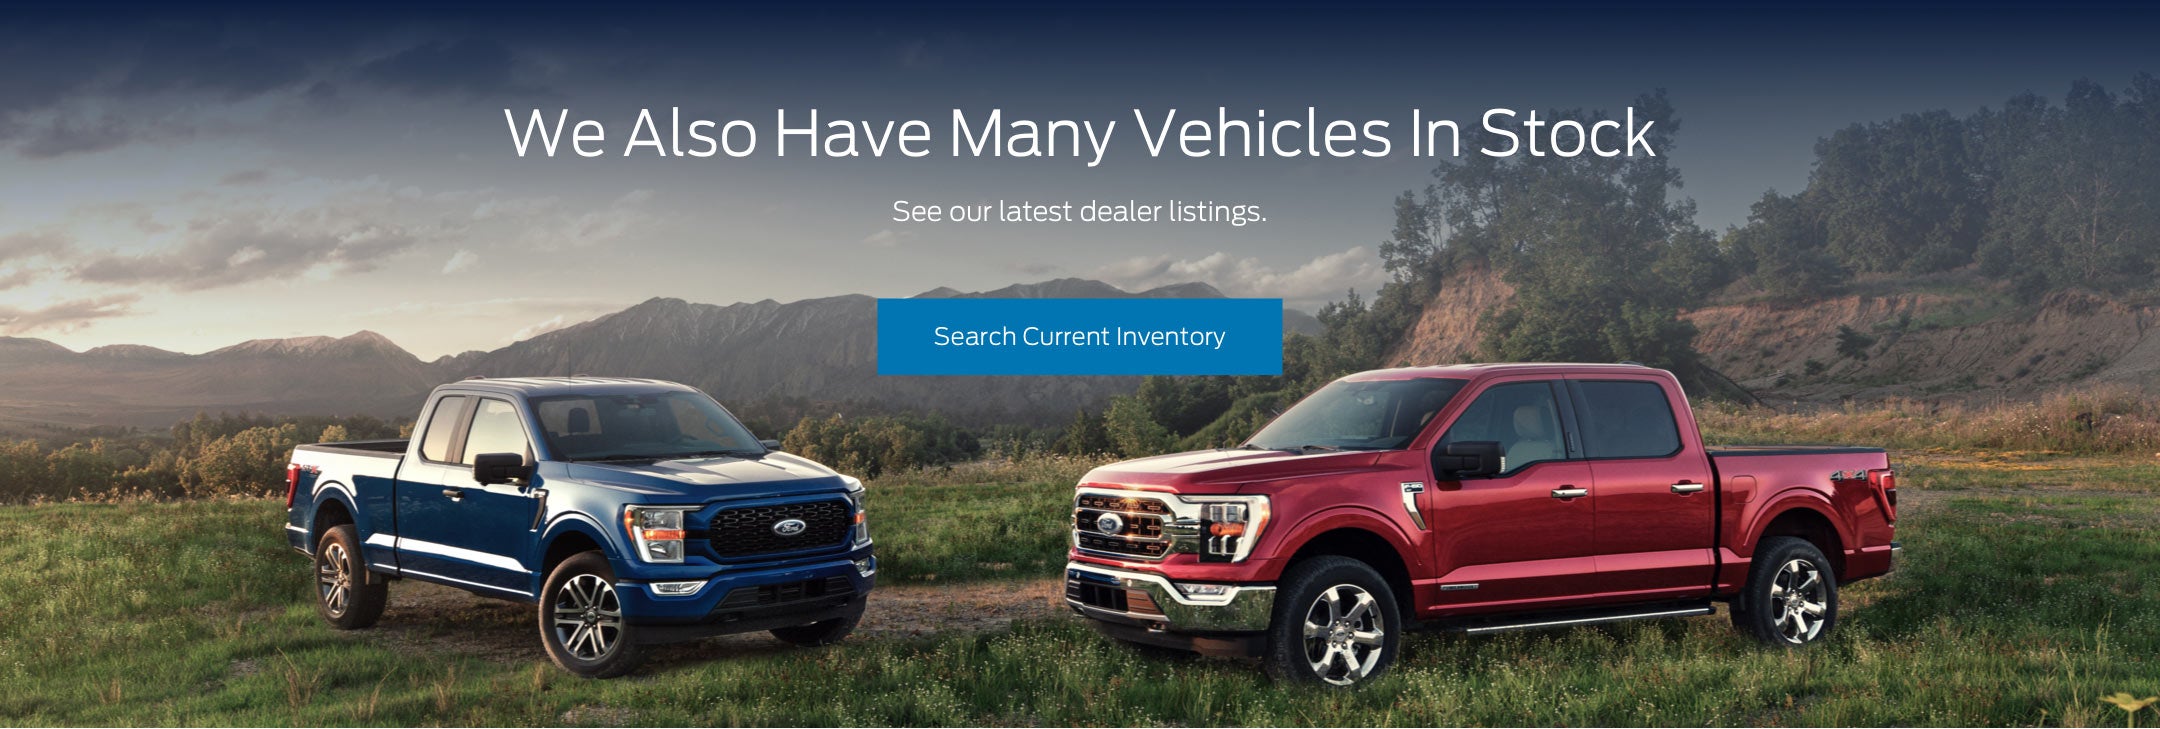 Ford vehicles in stock | Covert Ford in Austin TX